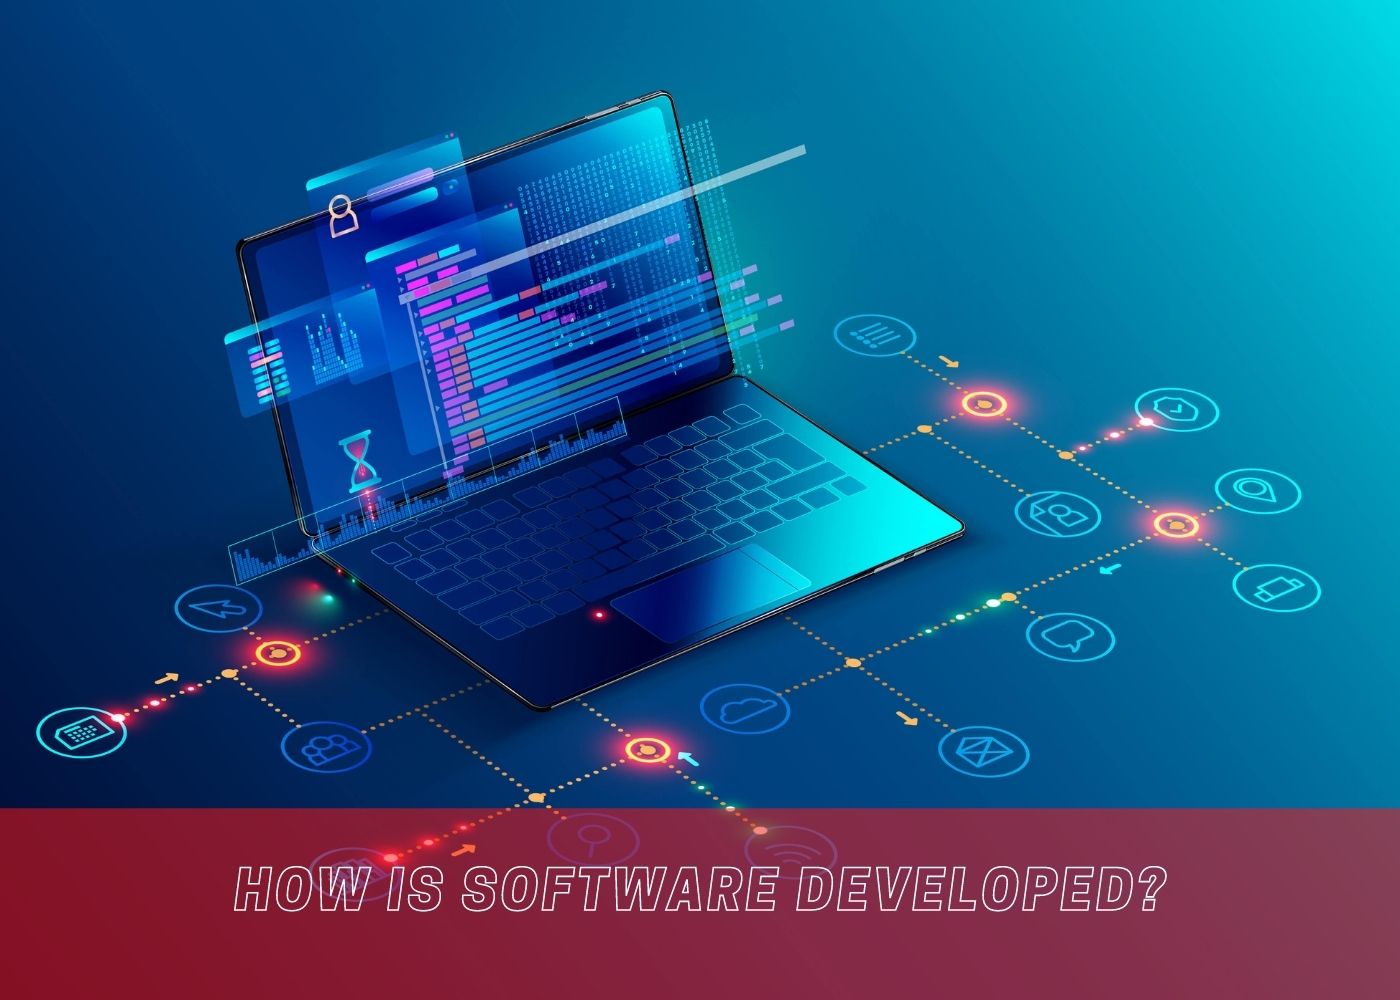 How is software developed?